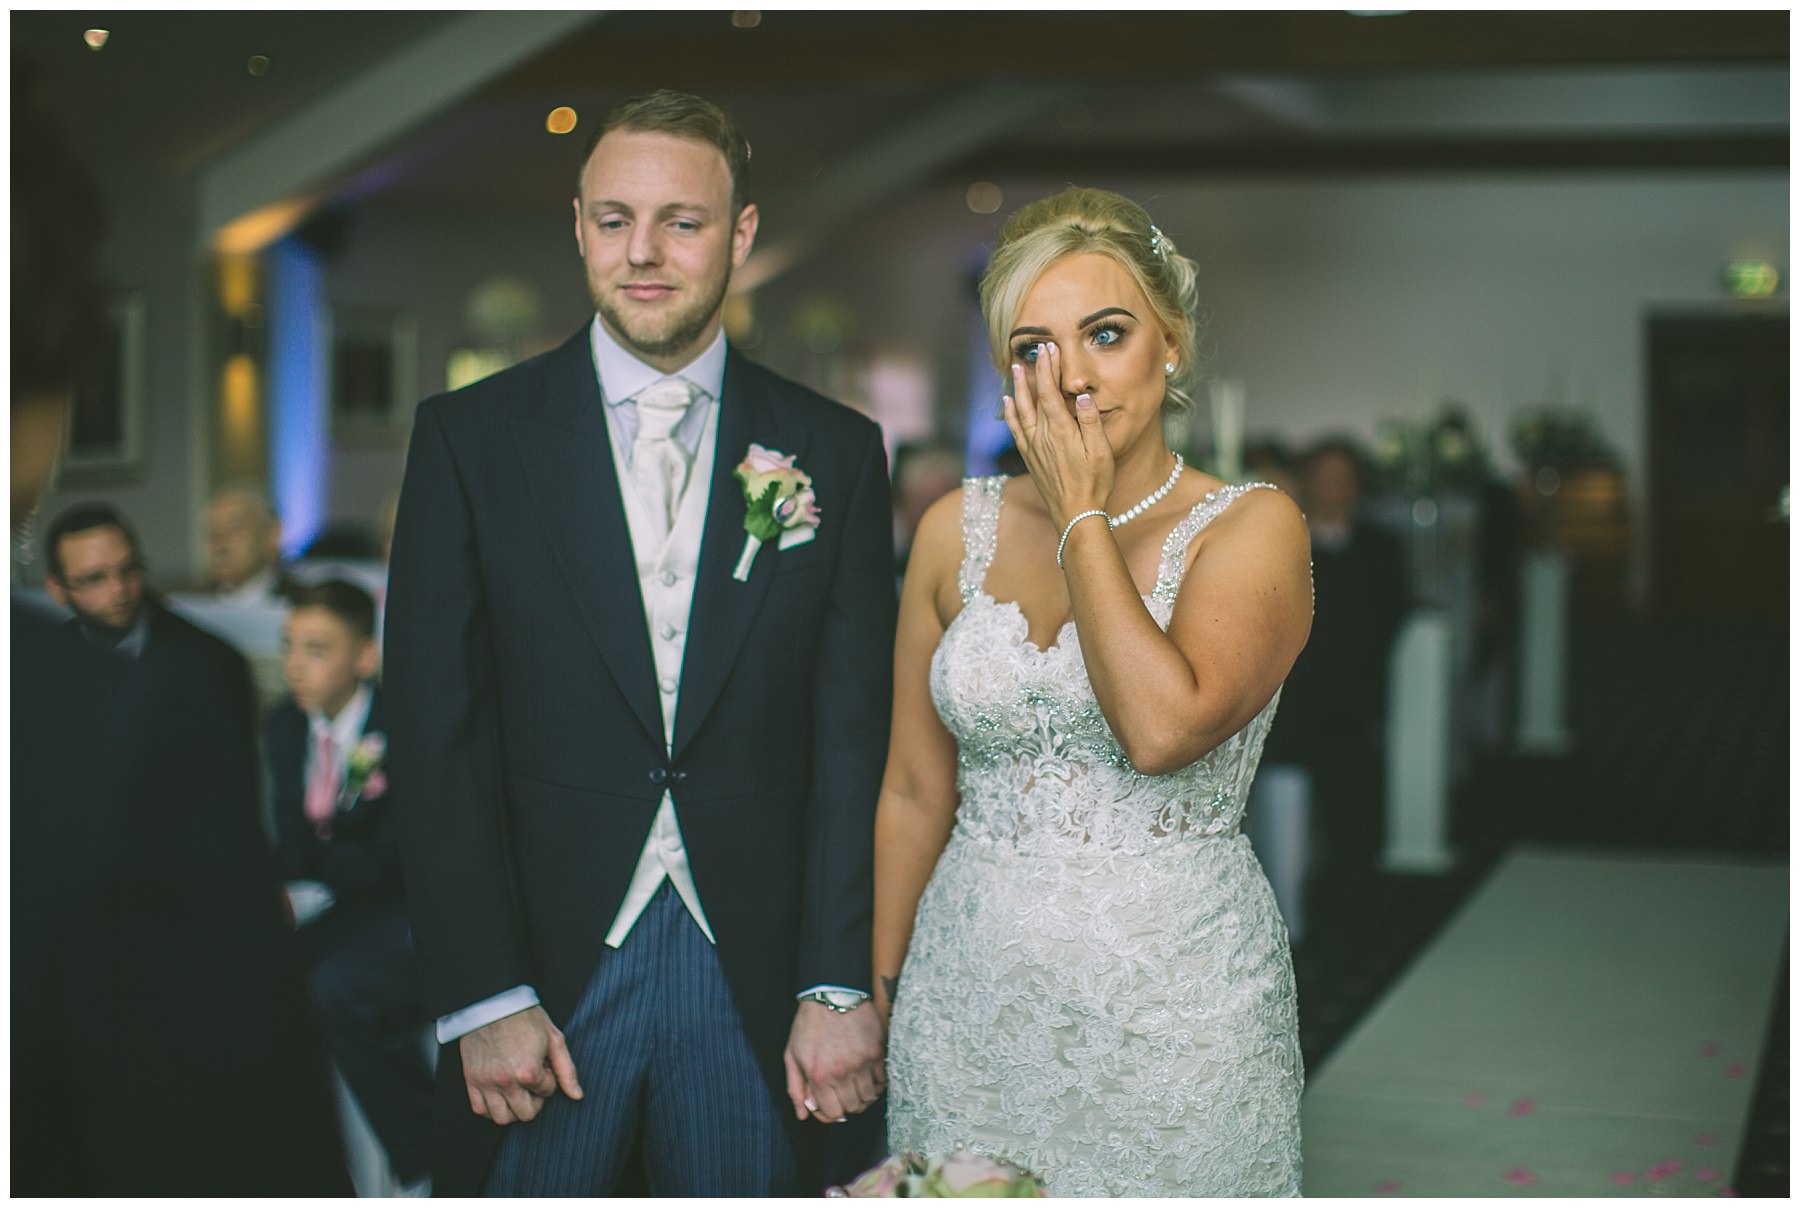 Bride wipes a tear from her eye during wedding ceremony